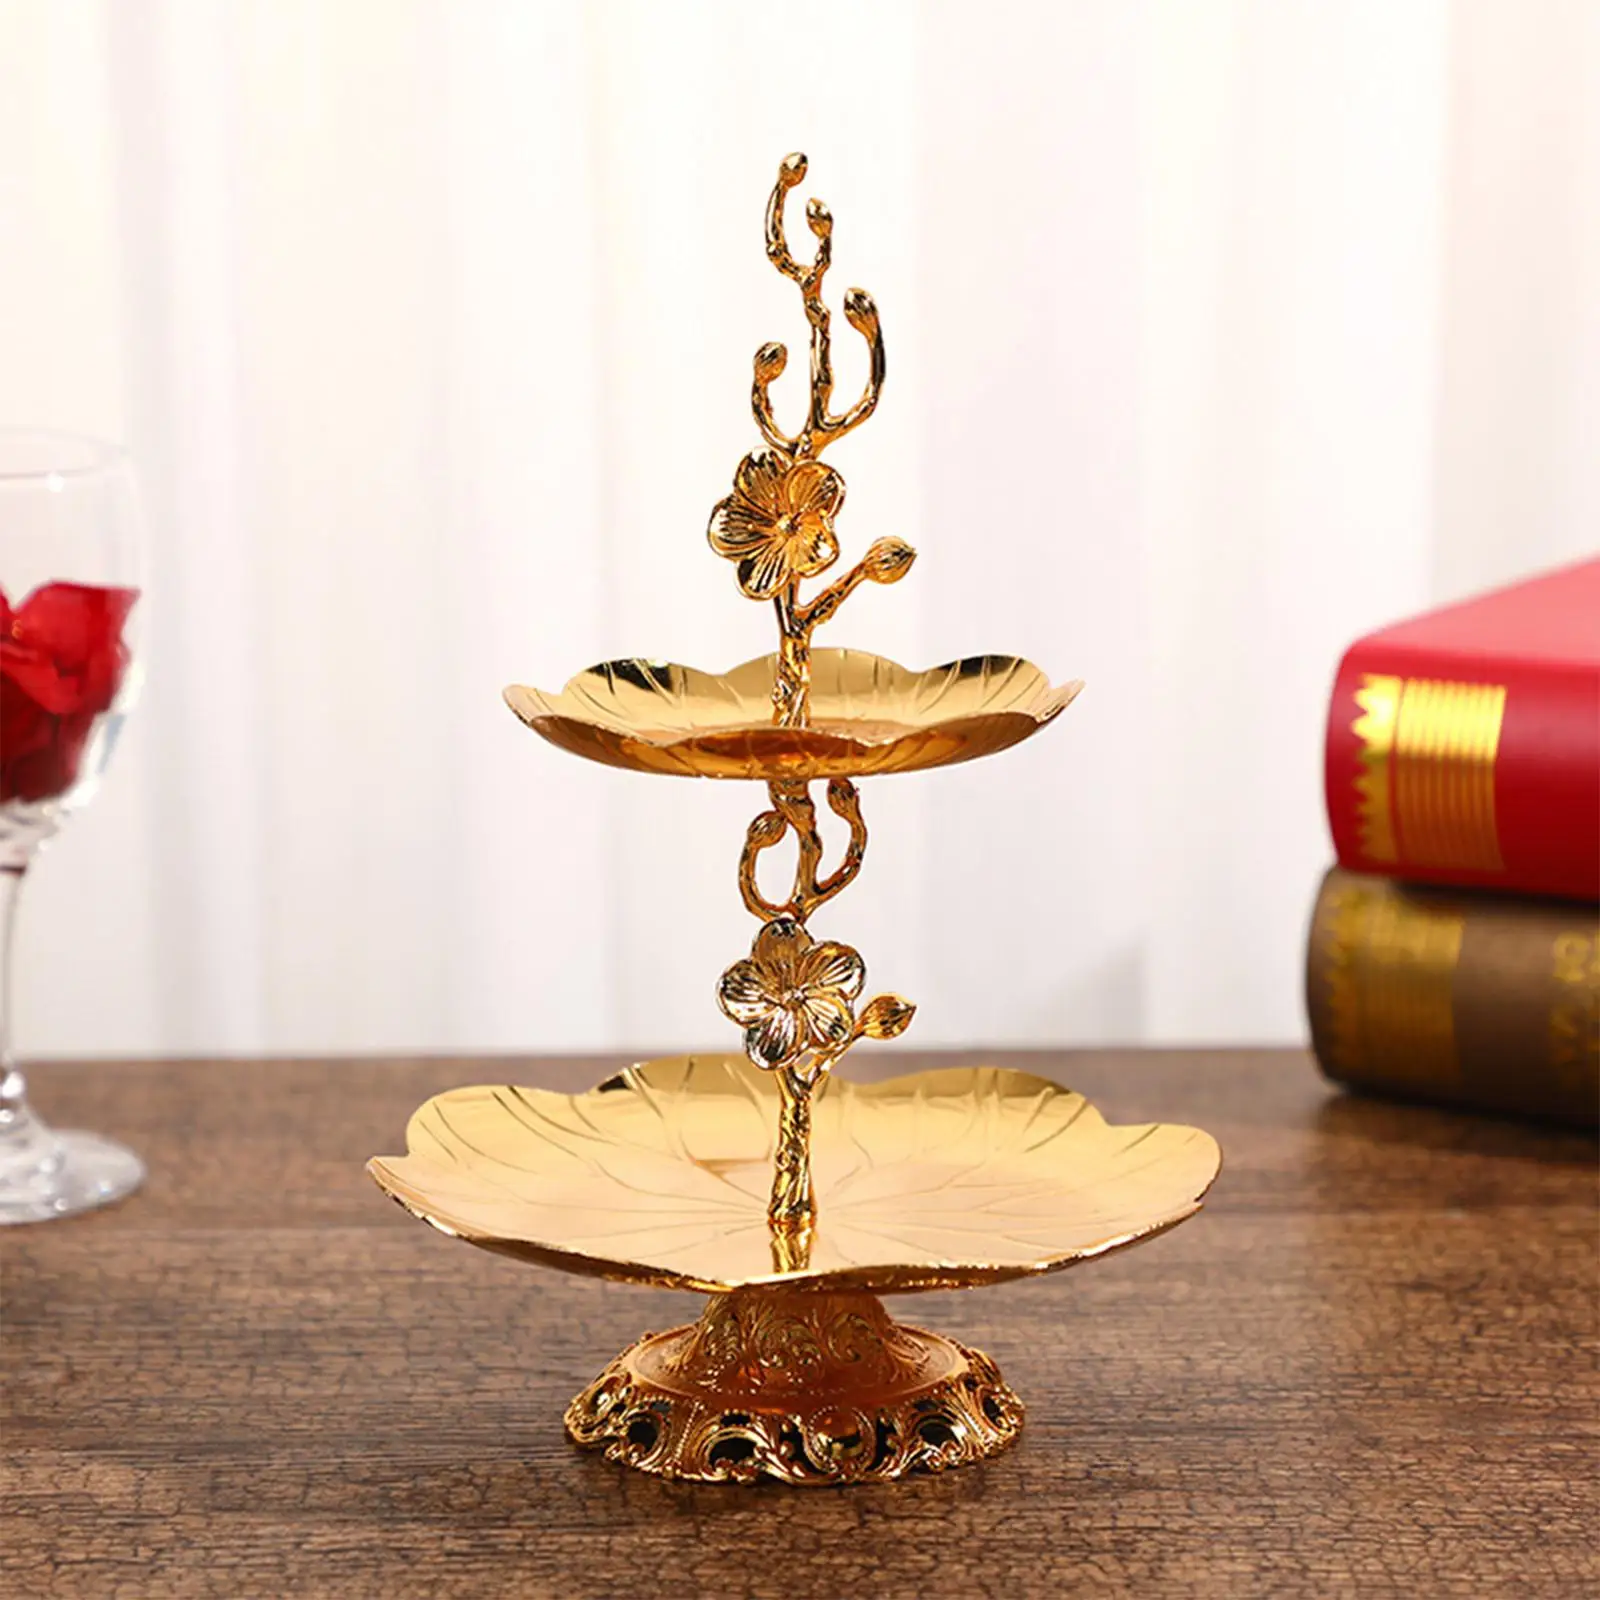 European Tier Gold Cupcake Stand Statue Cookie Tray Cake Snack Tray Serving